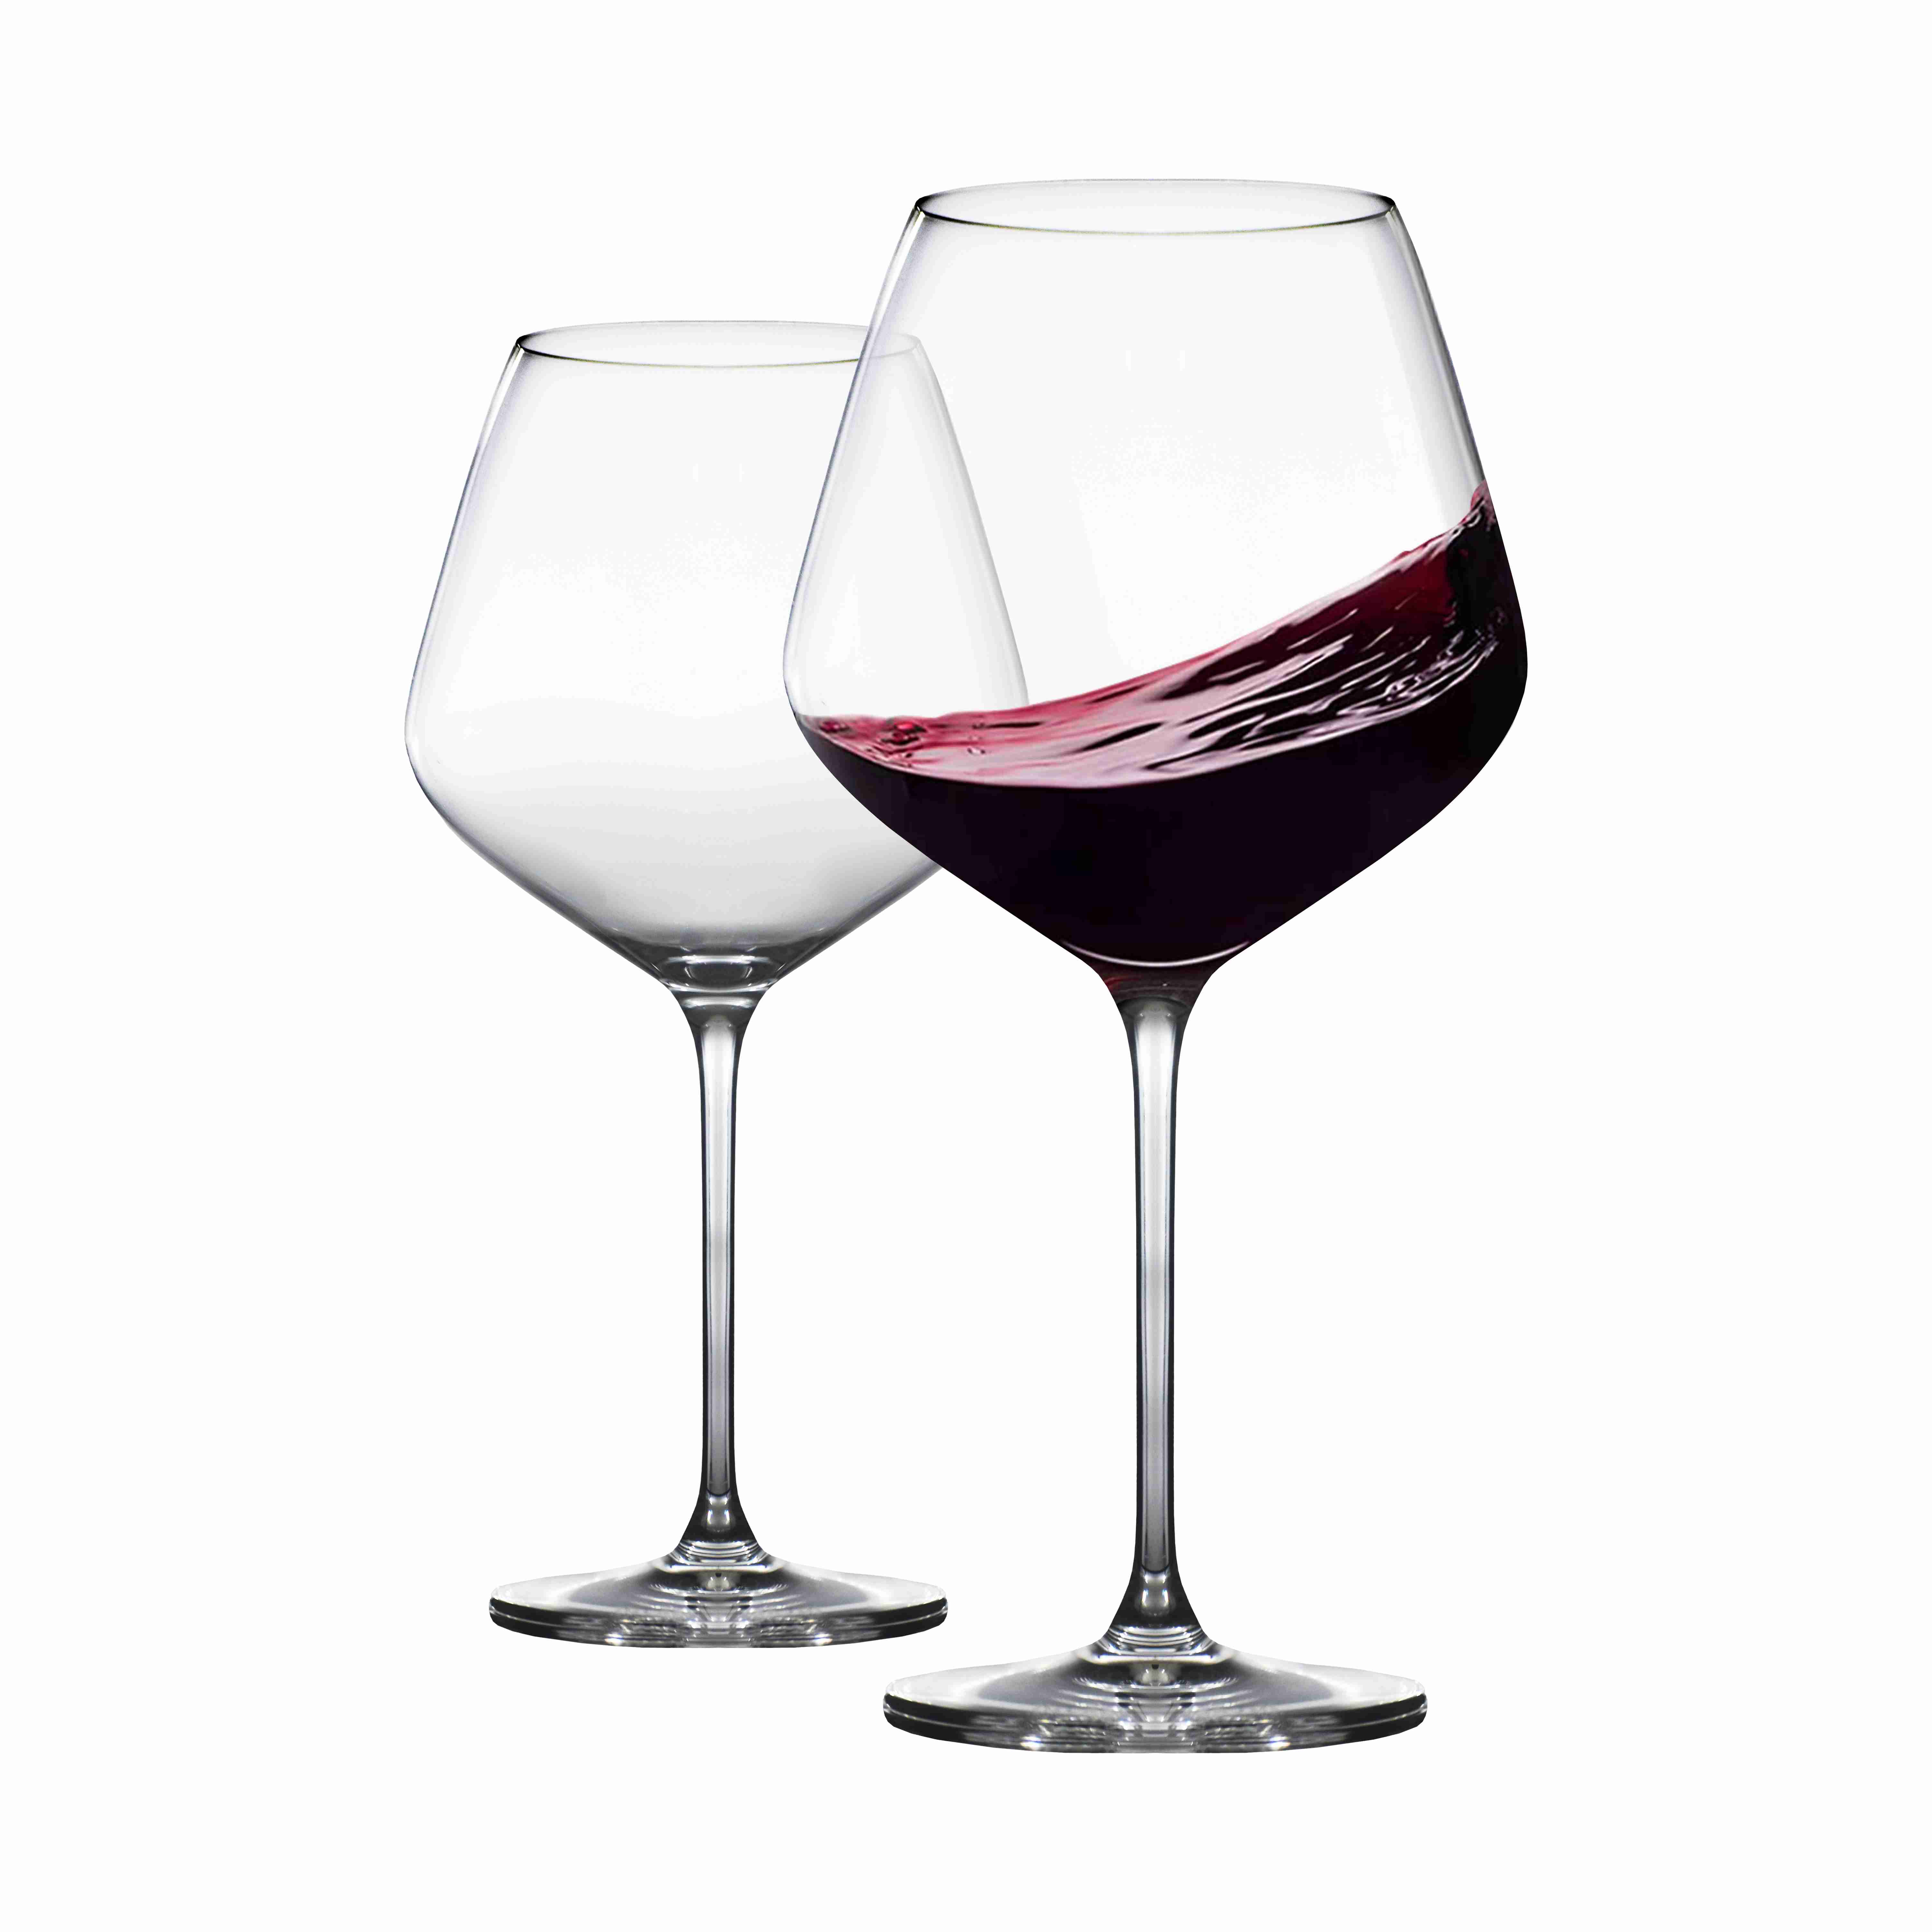 red-wine-glasses-set-of-2 with cash back rebate